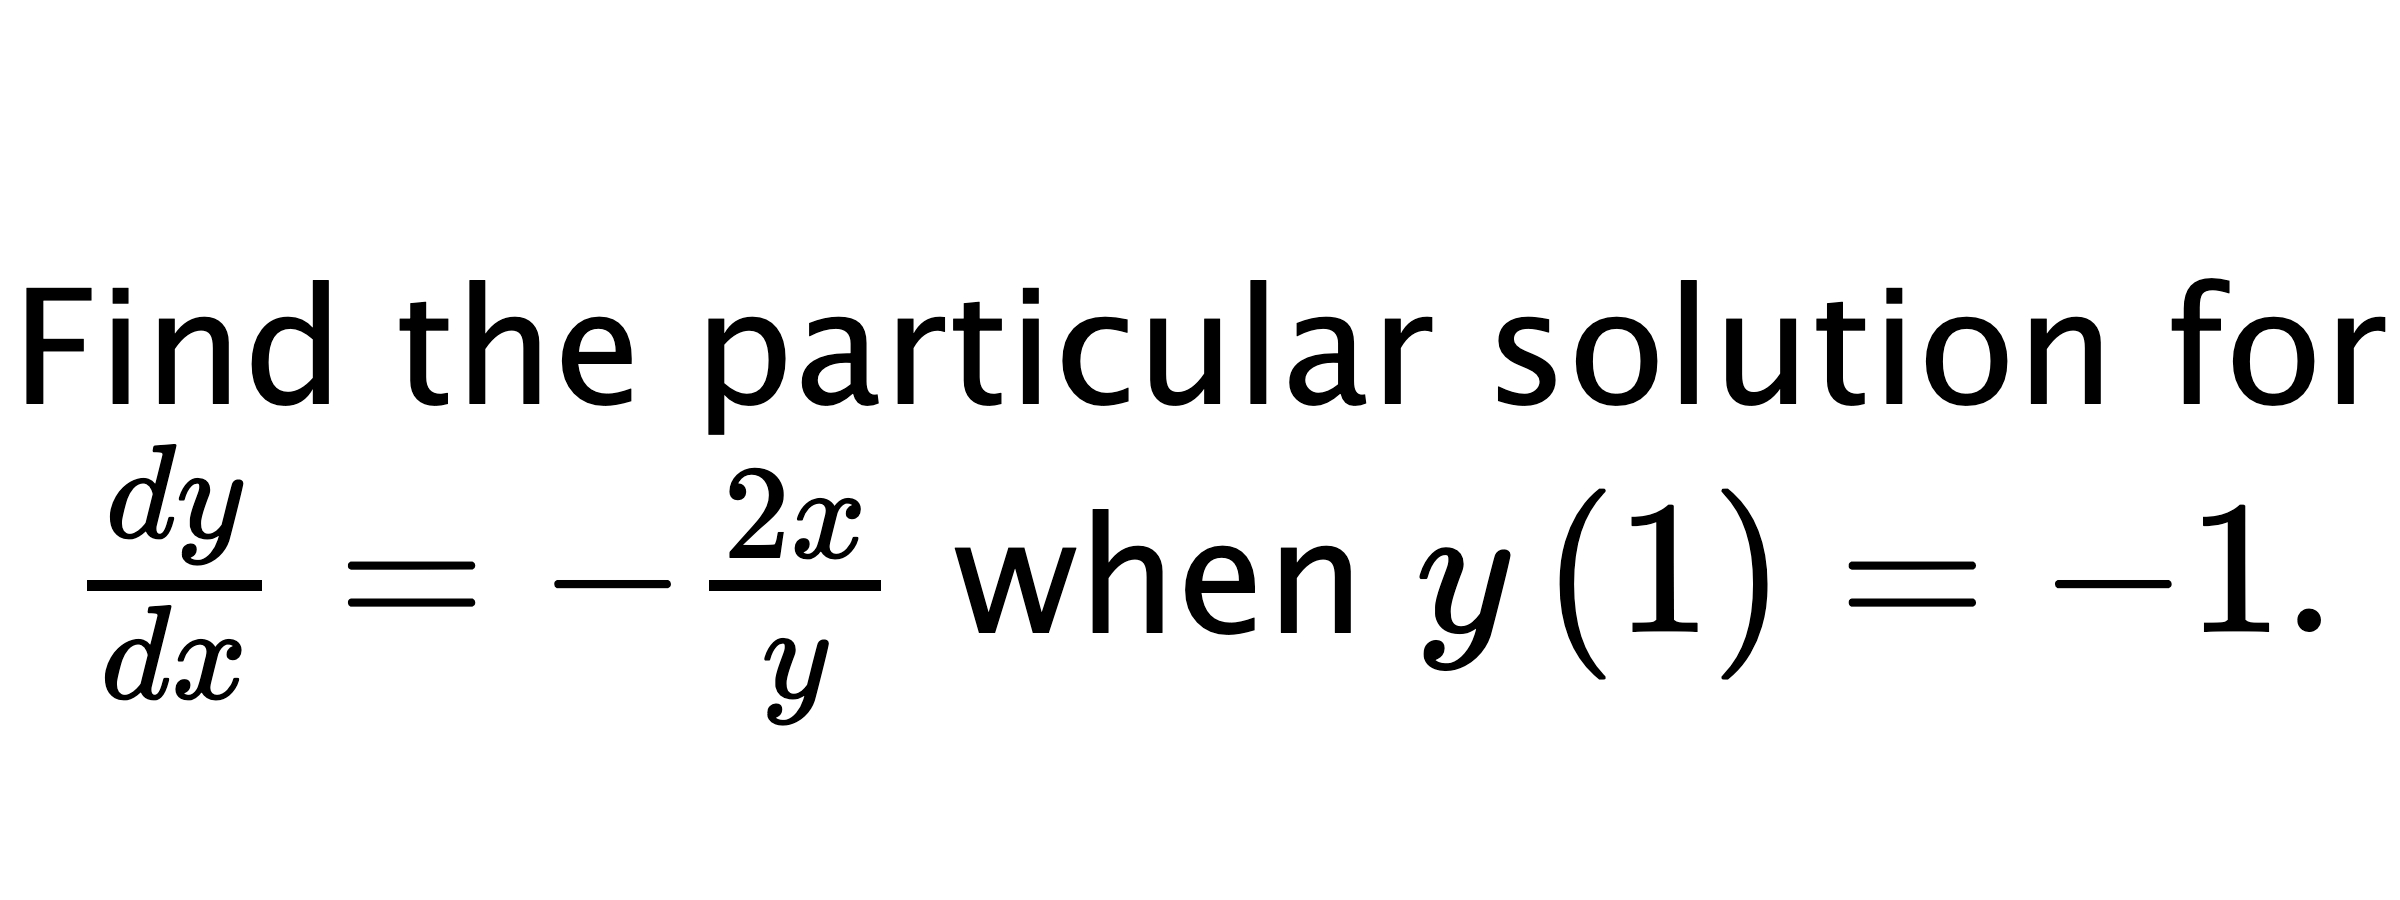  Find the particular solution for $ \frac{dy}{dx}=-\frac{2x}{y} $ when $ y\left( 1 \right)=-1. $